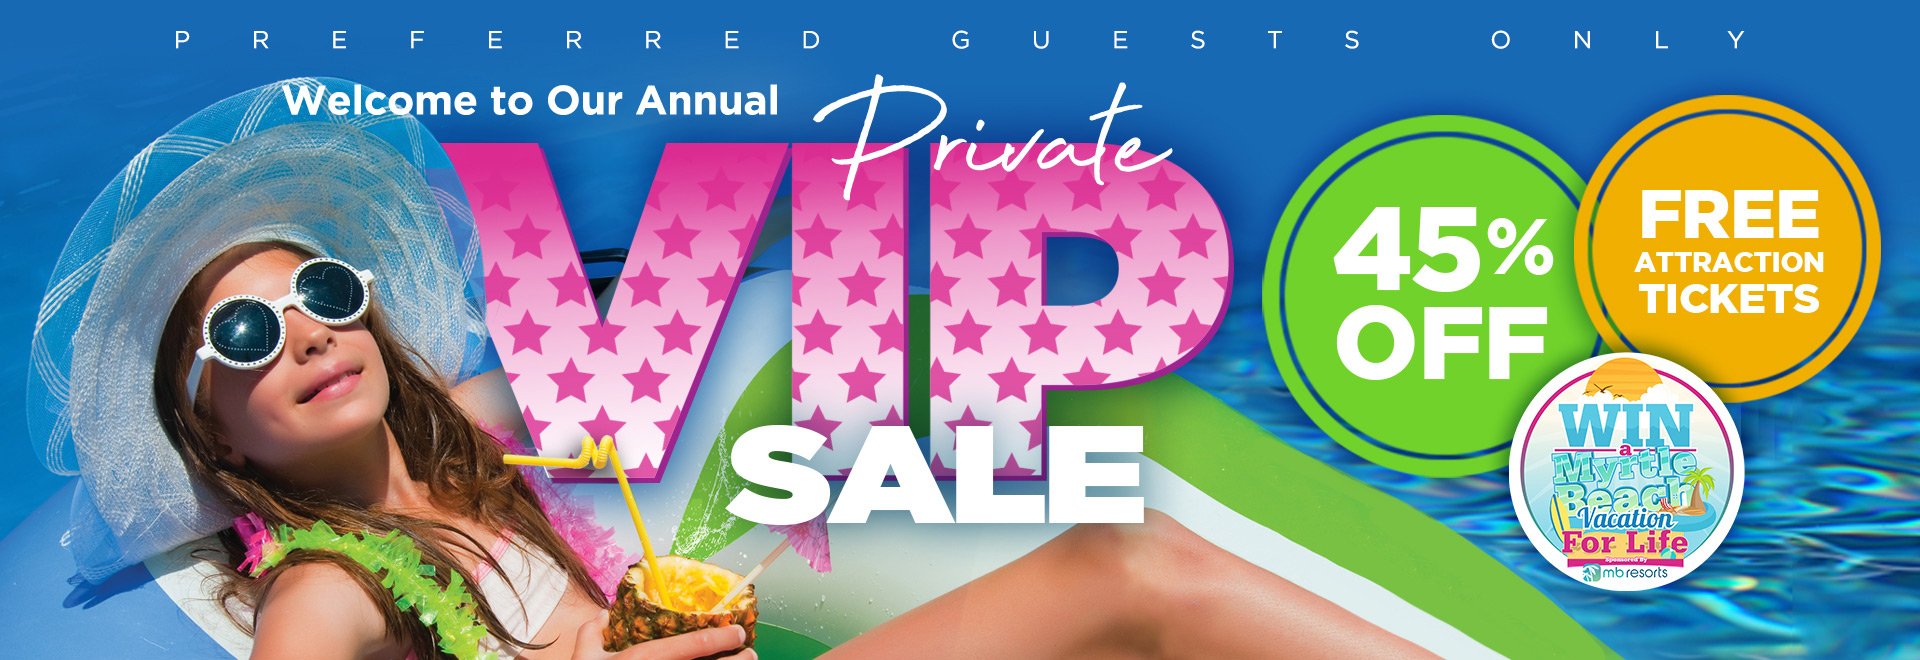 Private VIP Sale - 45% Off and Free Attraction Tickets